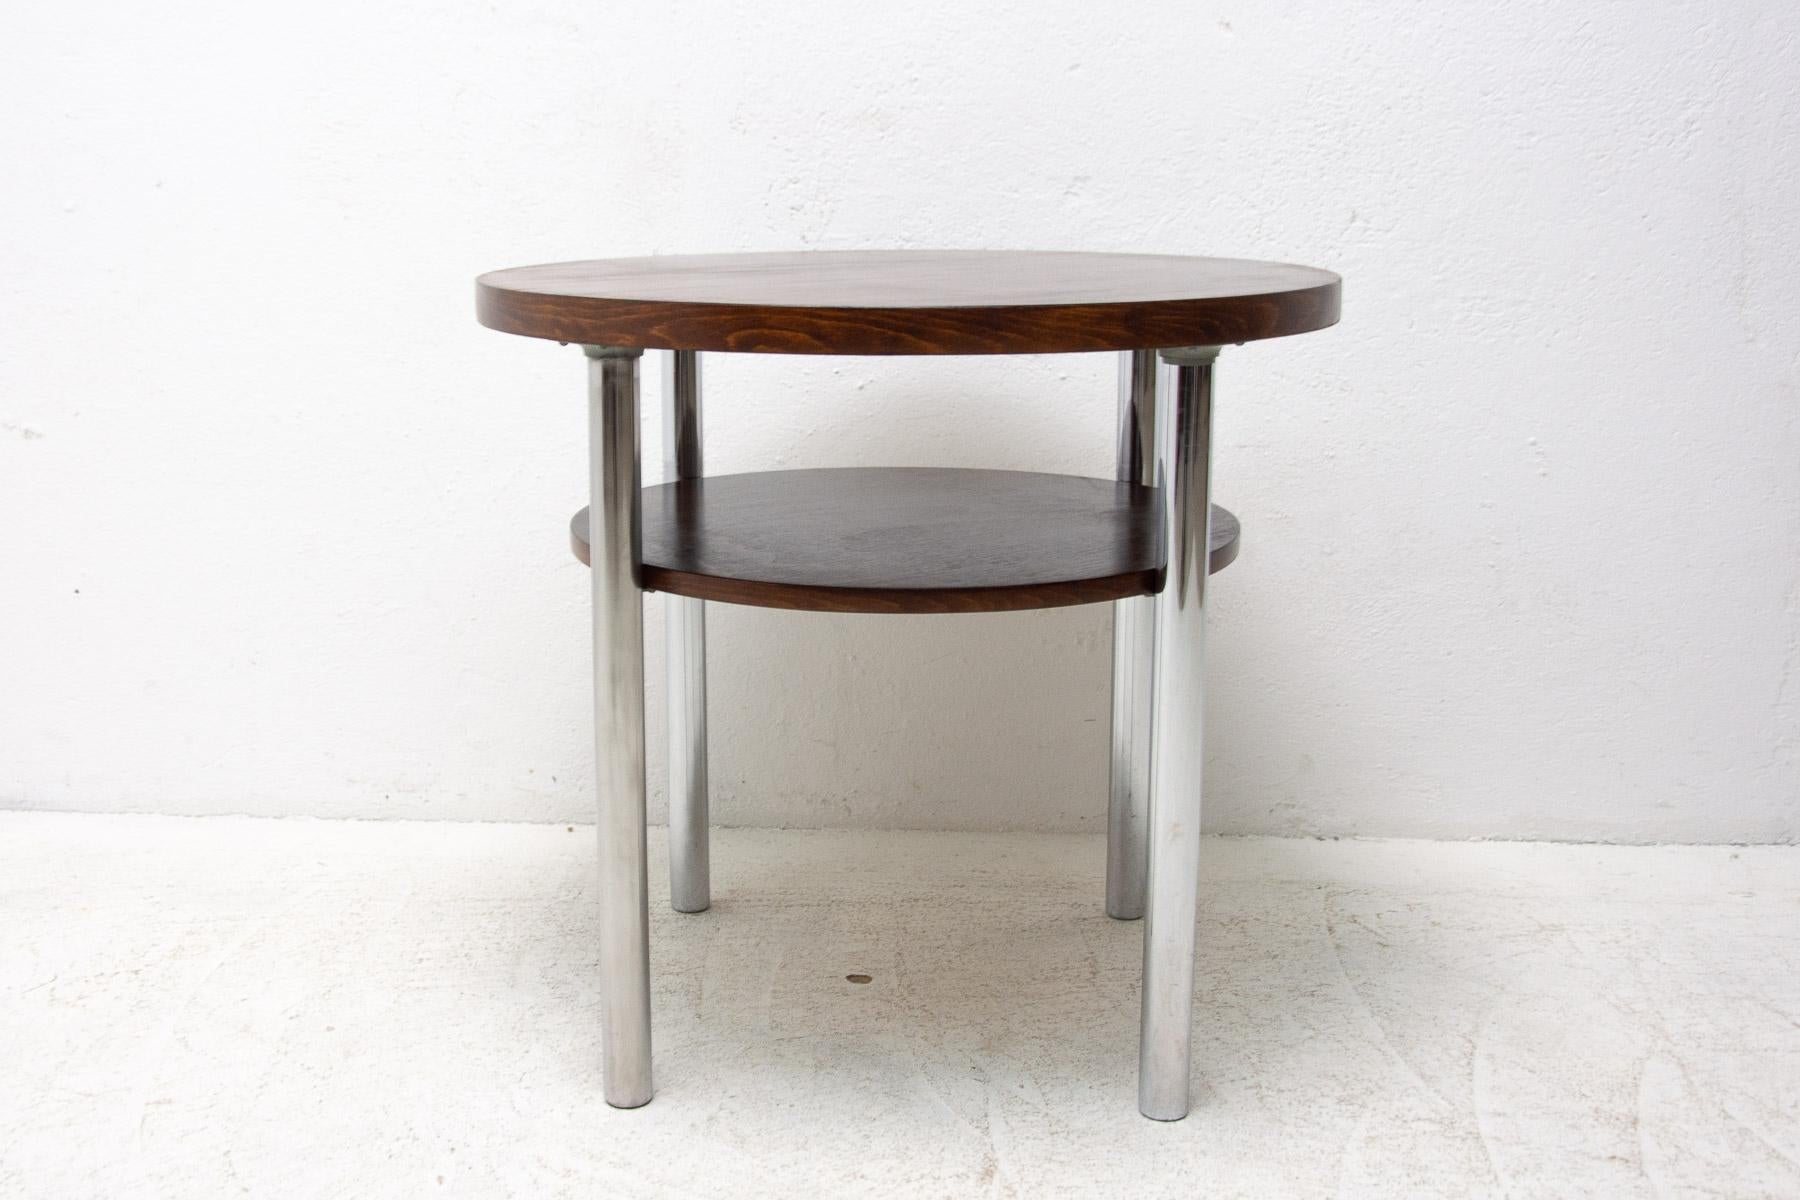 This coffee table was designed by Robert Slezák in the 1930´s and made in the former Czechoslovakia in the 1950s by the famous company Kovona. The table features a chrome-plated metal base and beech wood plates. Chrome structure is in very good